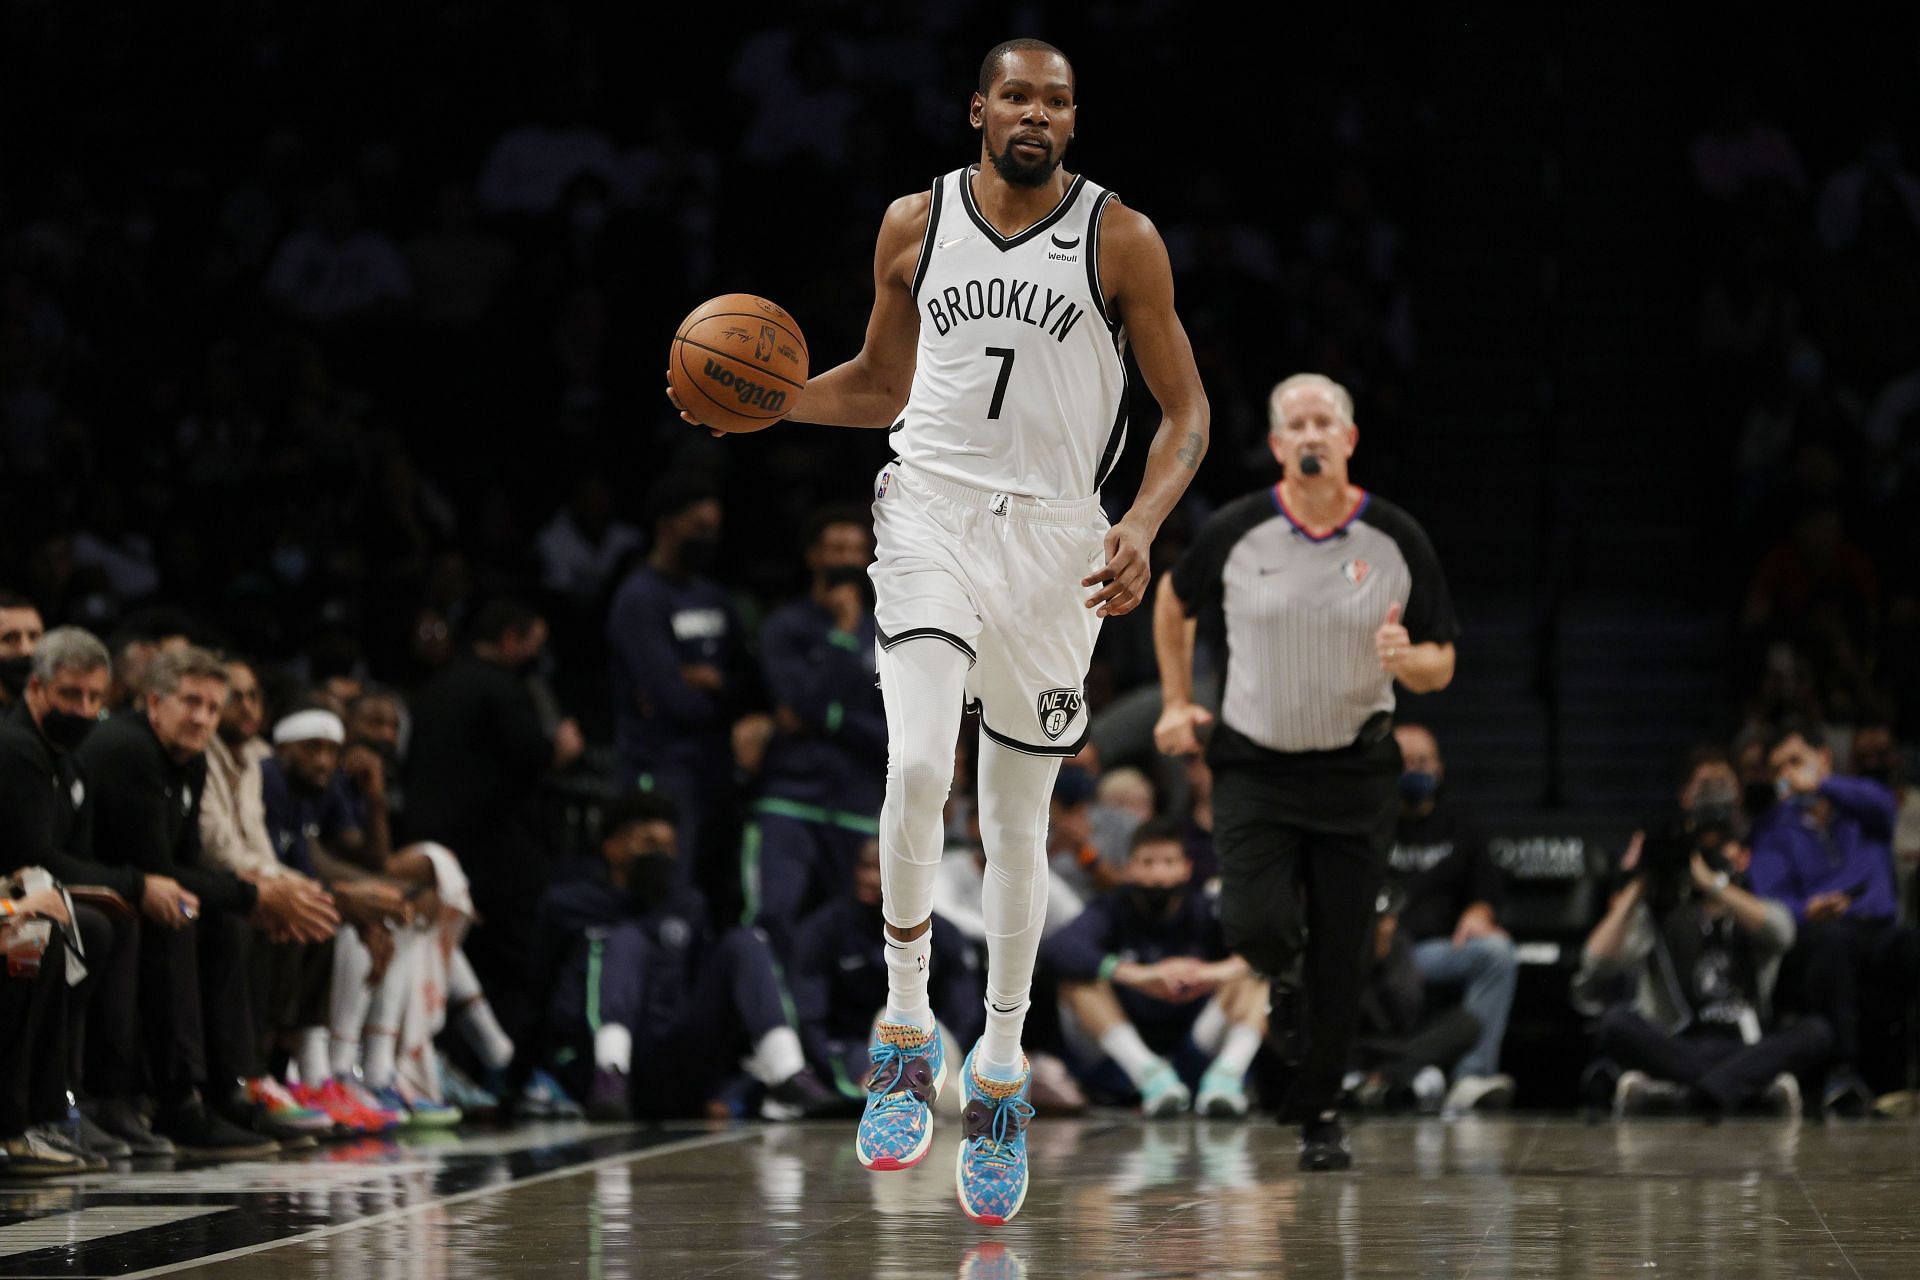 Kevin Durant #7 of the Brooklyn Nets.